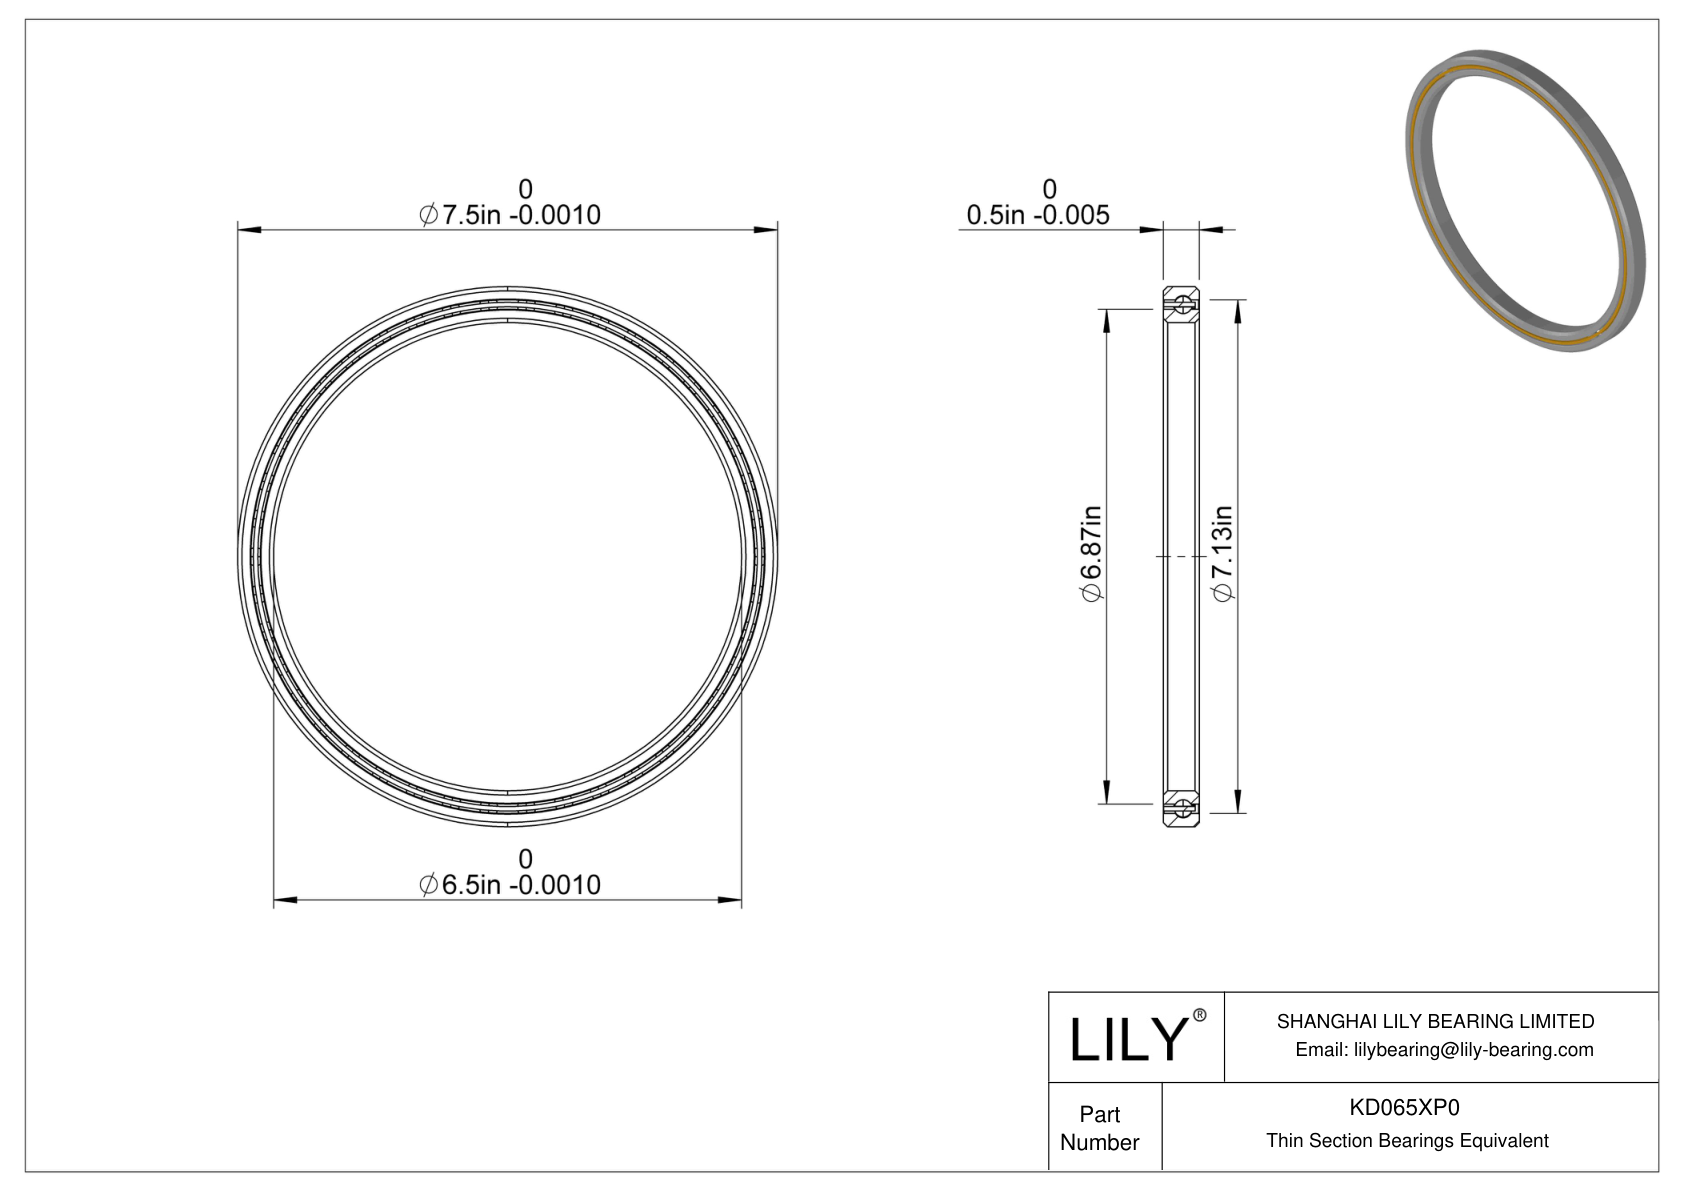 KD065XP0 Constant Section (CS) Bearings cad drawing